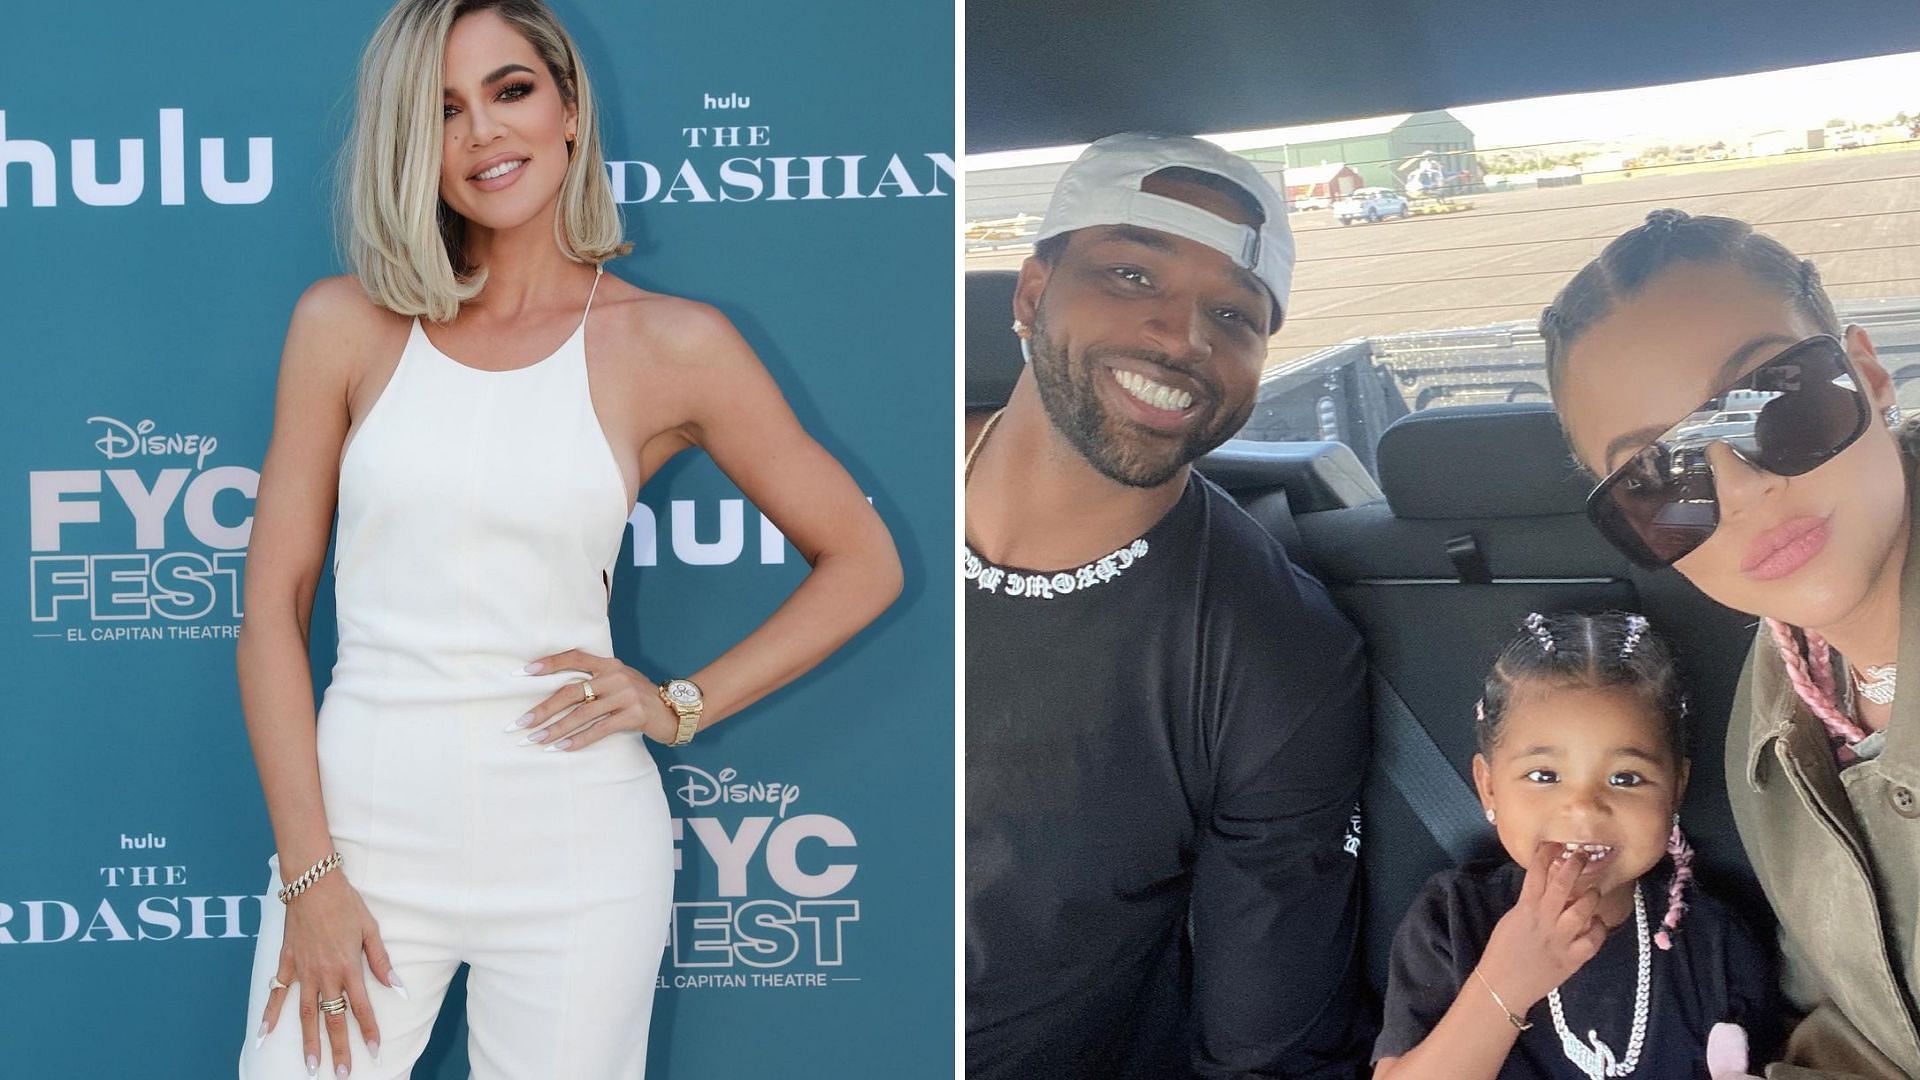 Khloe reveals Tristian had proposed to her before the scandal